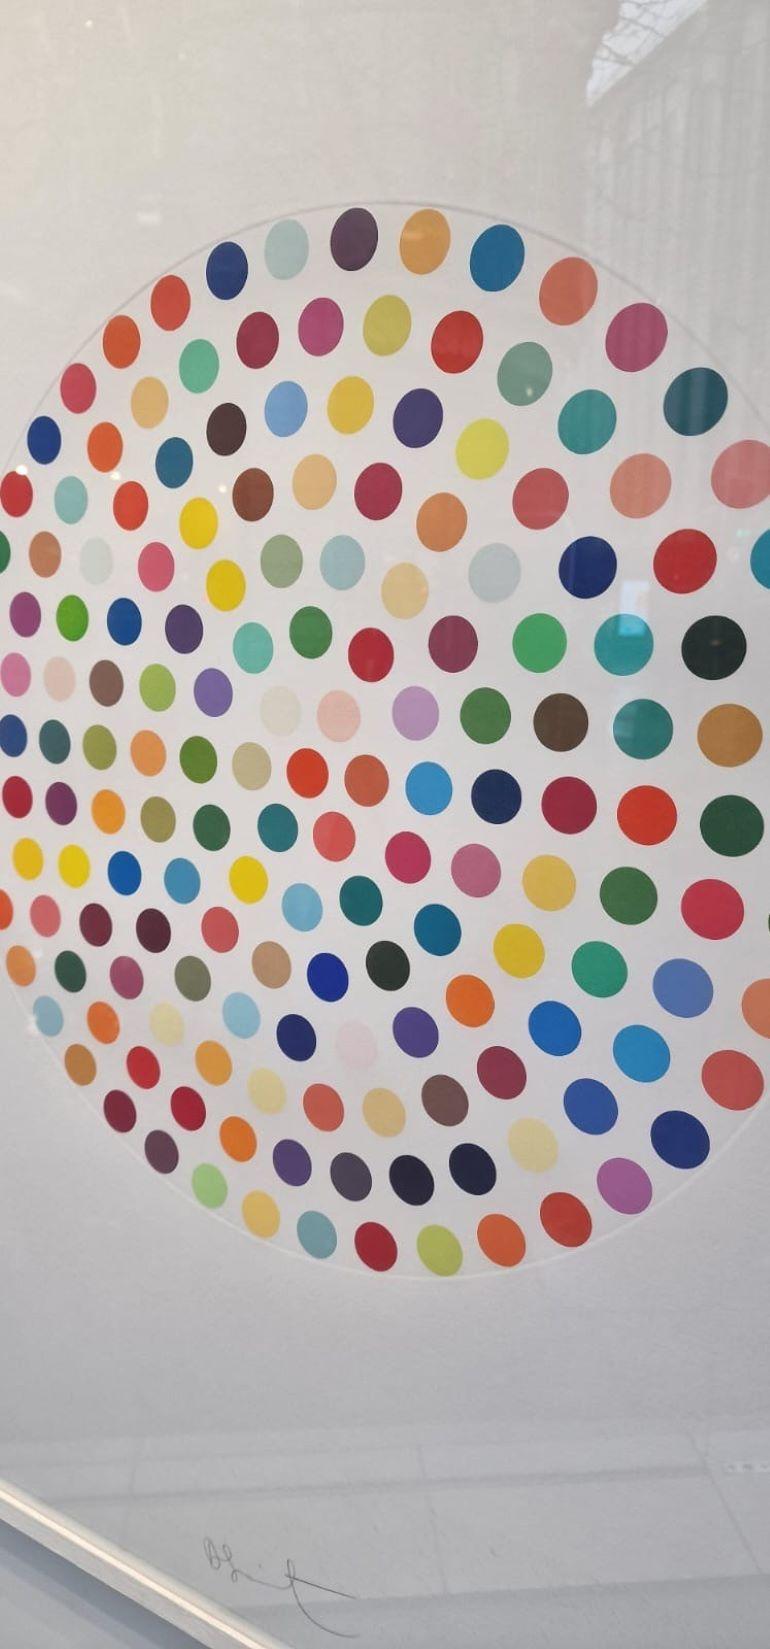 Cephalothin - Abstract Print by Damien Hirst